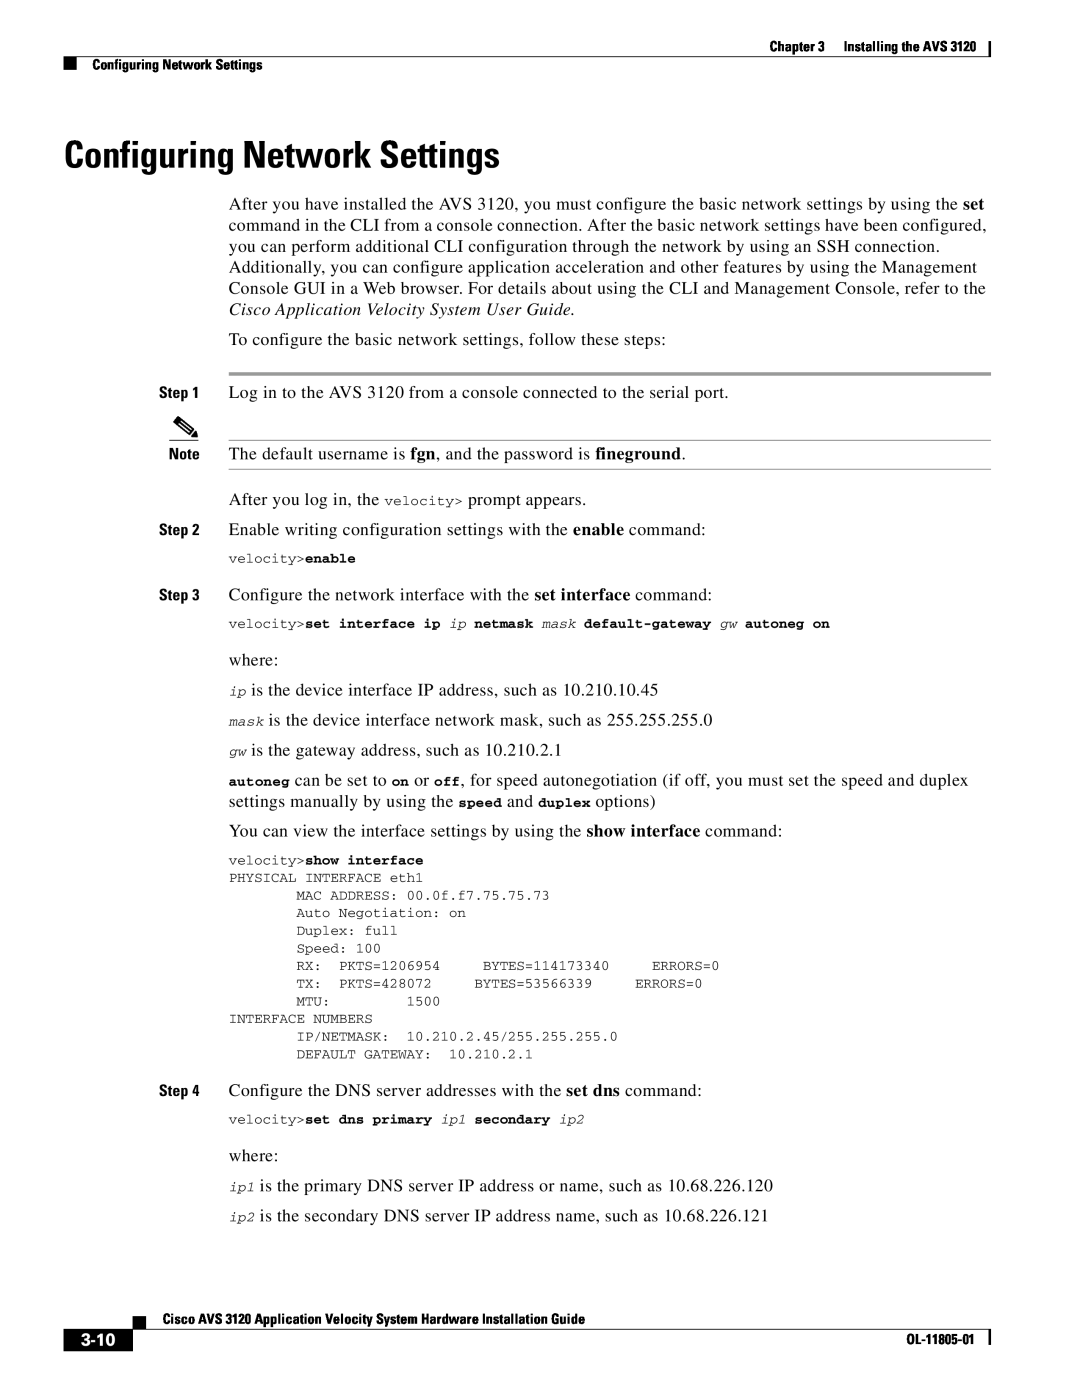 Cisco Systems AVS 3120 installation instructions Configuring Network Settings, 3-10 